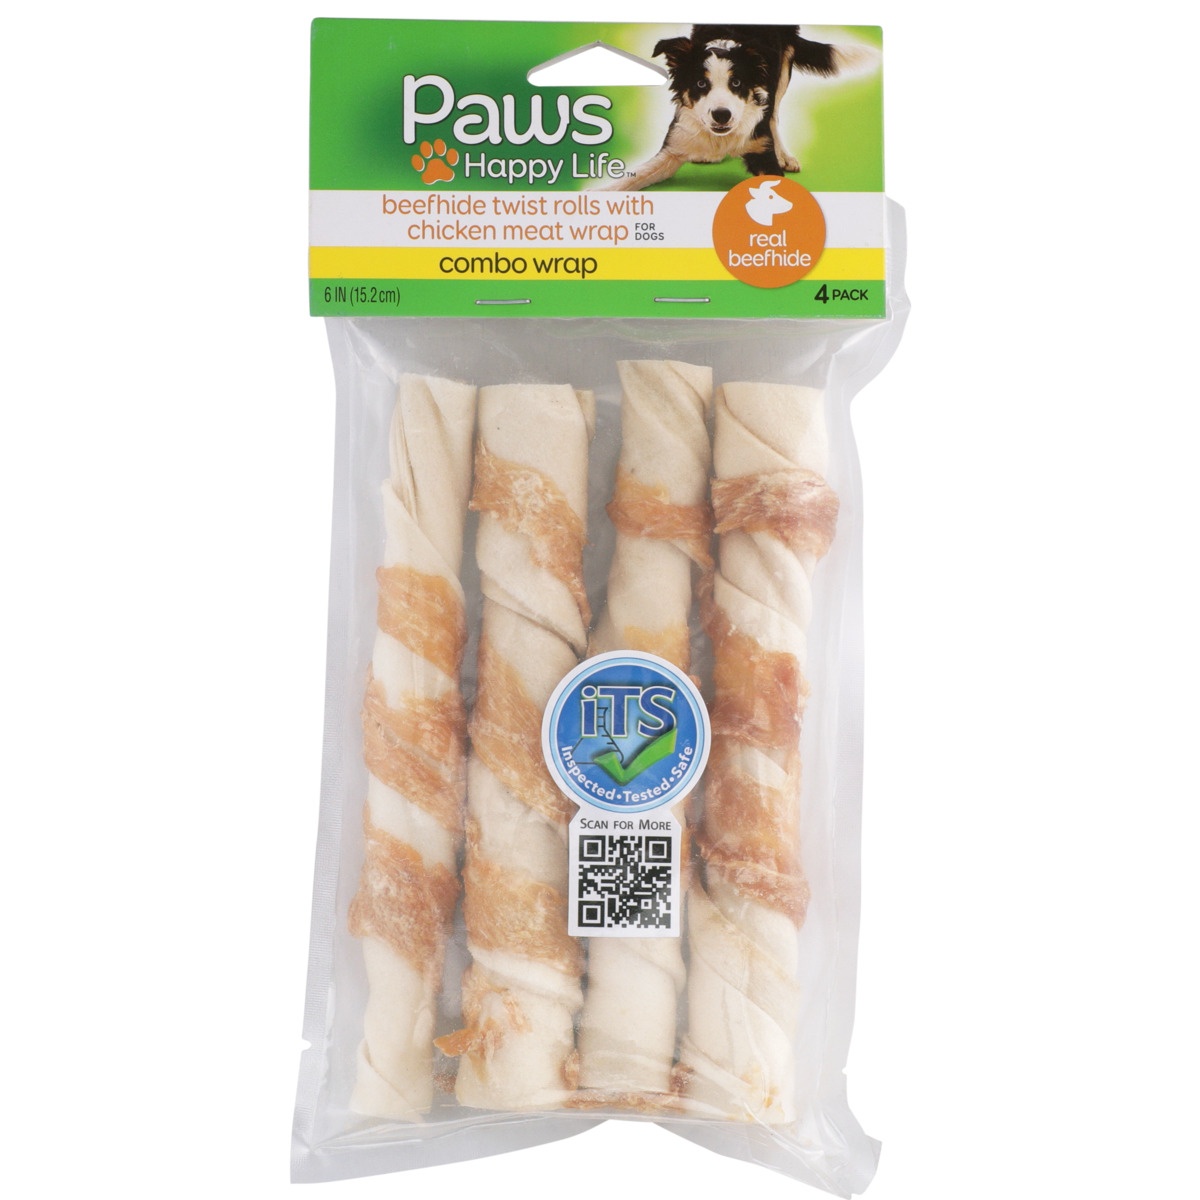 slide 7 of 8, Paws Happy Life Combo Wrap Beefhide Twist Rolls With Chicken Meat Wrap For Dogs, 4 ct